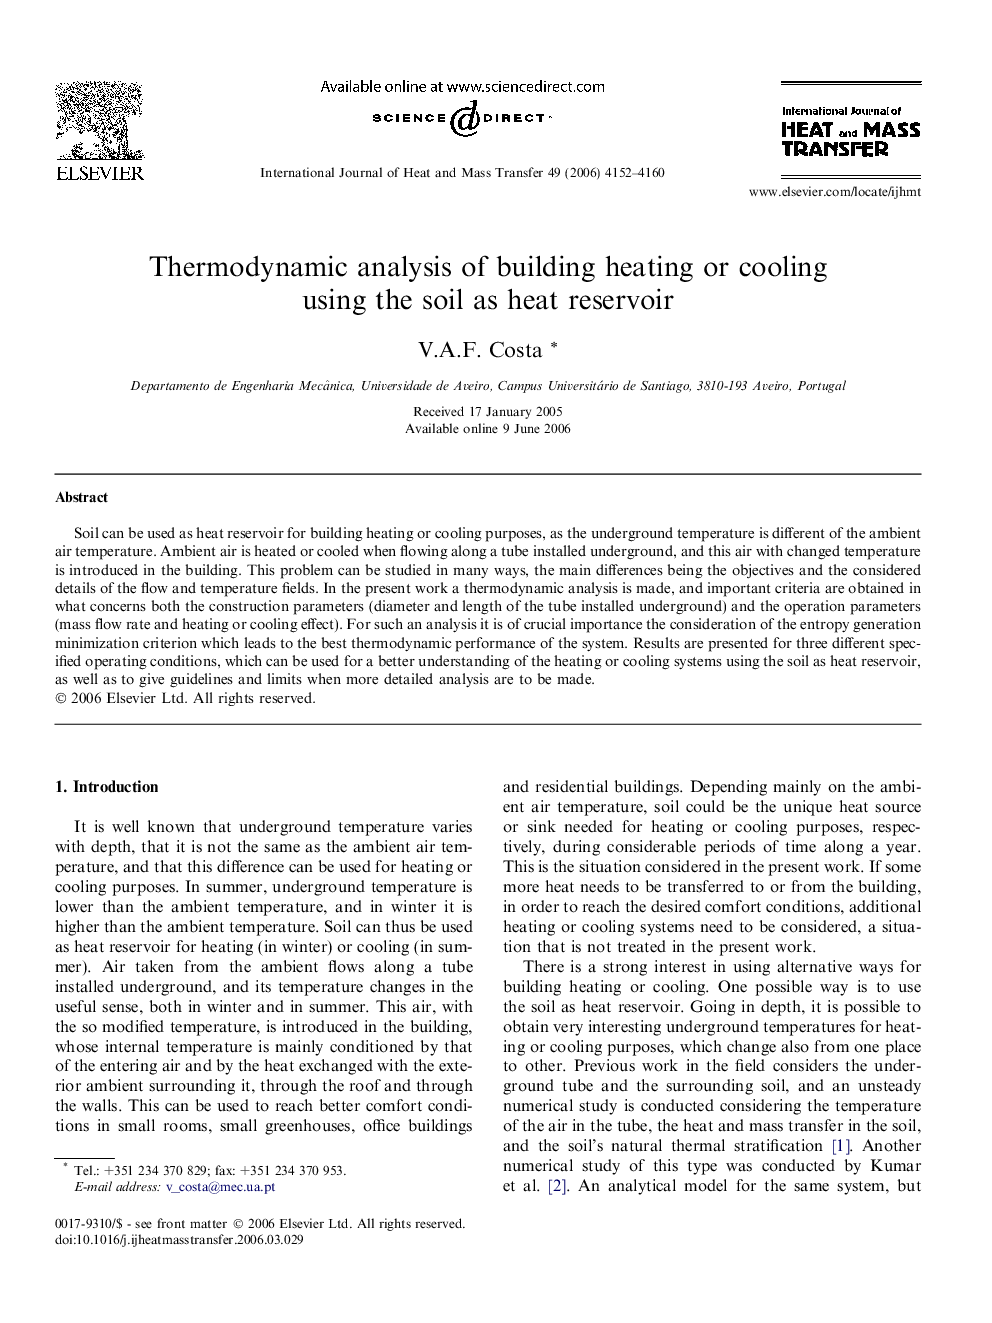 Thermodynamic analysis of building heating or cooling using the soil as heat reservoir